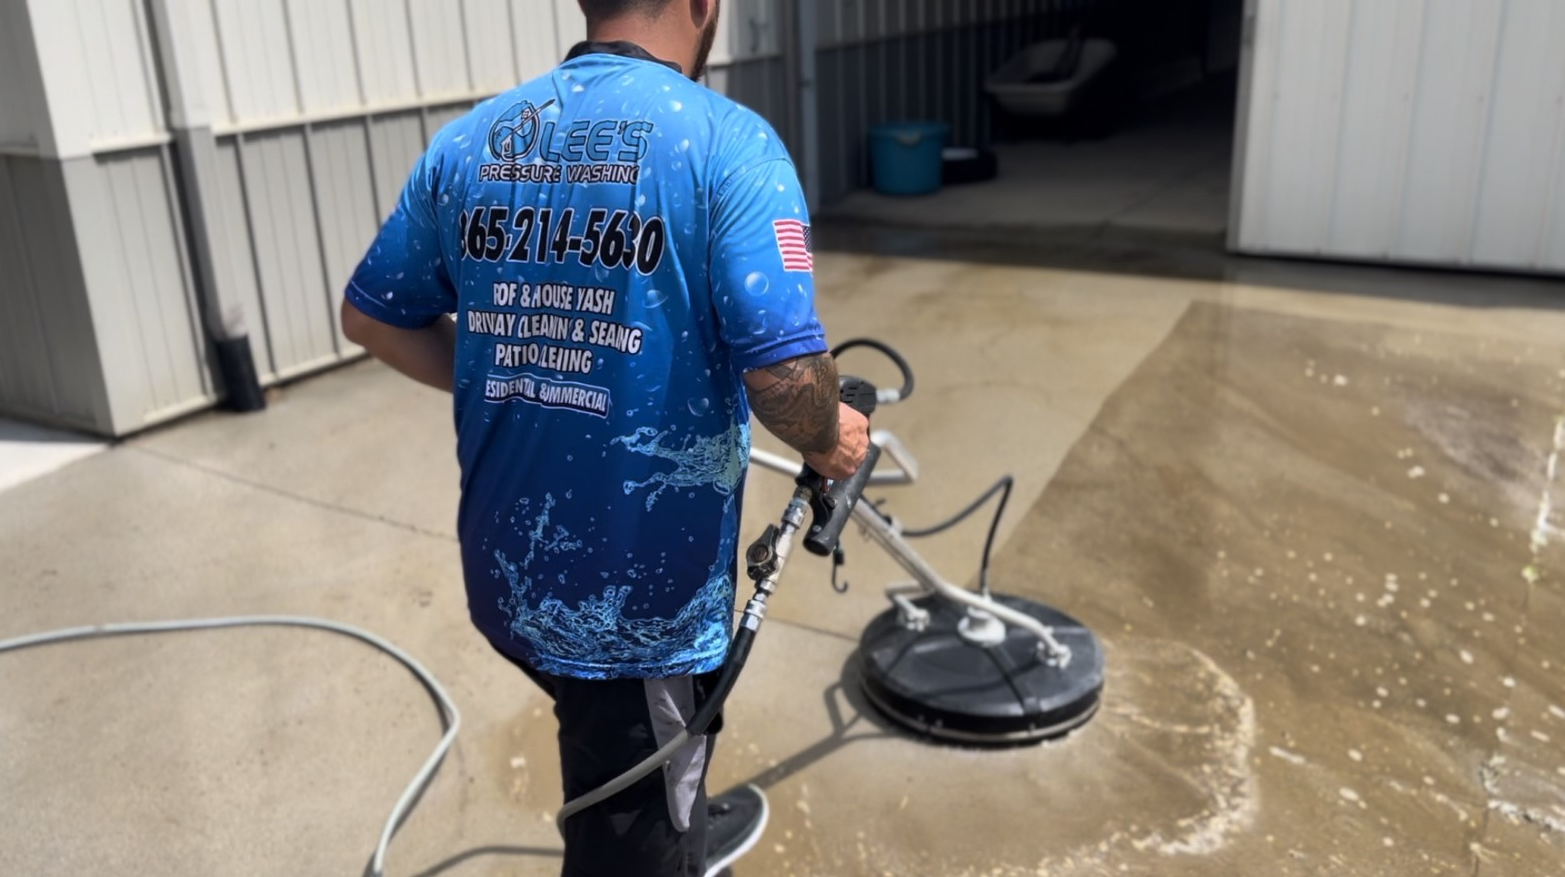 a man in a blue shirt is cleaning a concrete floor with a machine .